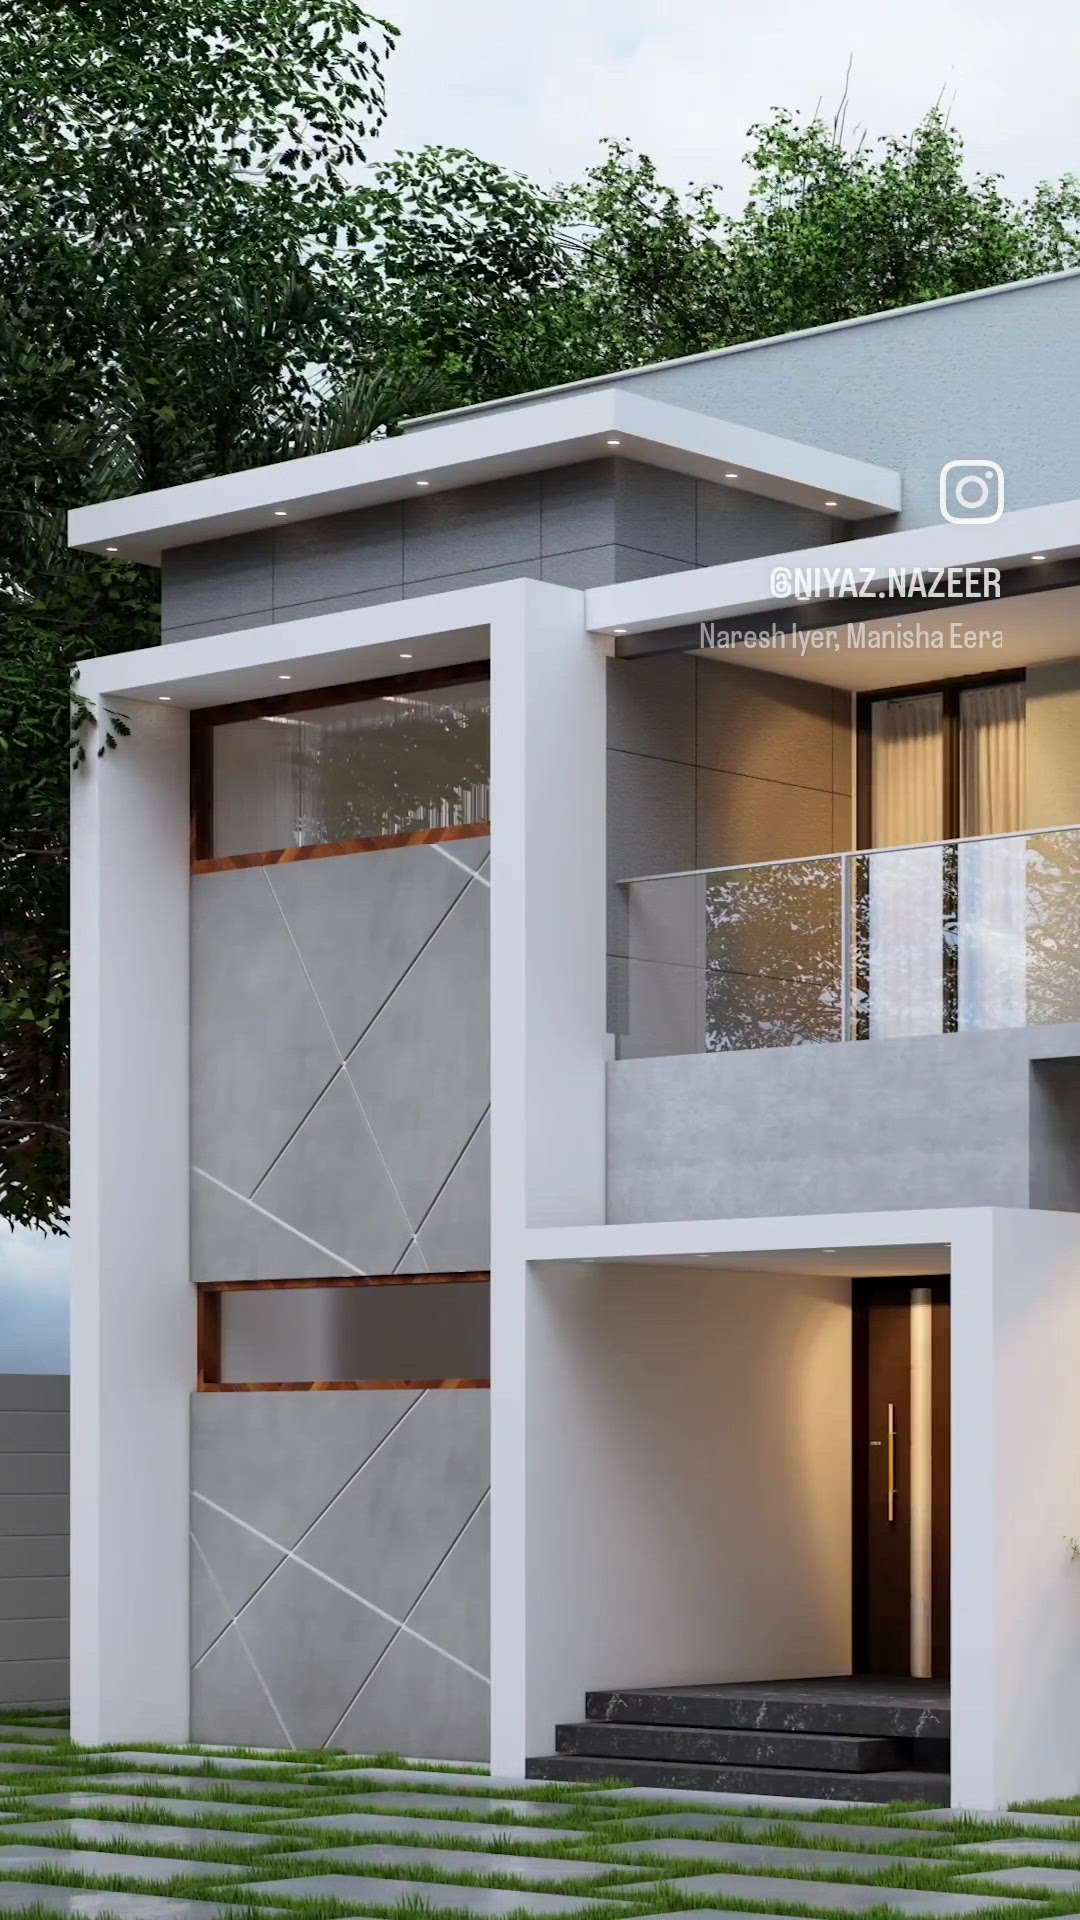 New ✨️

Dm to prepare 3d elevation of your dream home at low cost
Wh: 8075-478160

#keralahomes
#viralhomes
#keralahouse
#keralahome3delevation
#3dvisualization
#keralaviral
#architecture
#archidesignhome
#architecturevisualization
#3dvisualization
#3dhomedesign